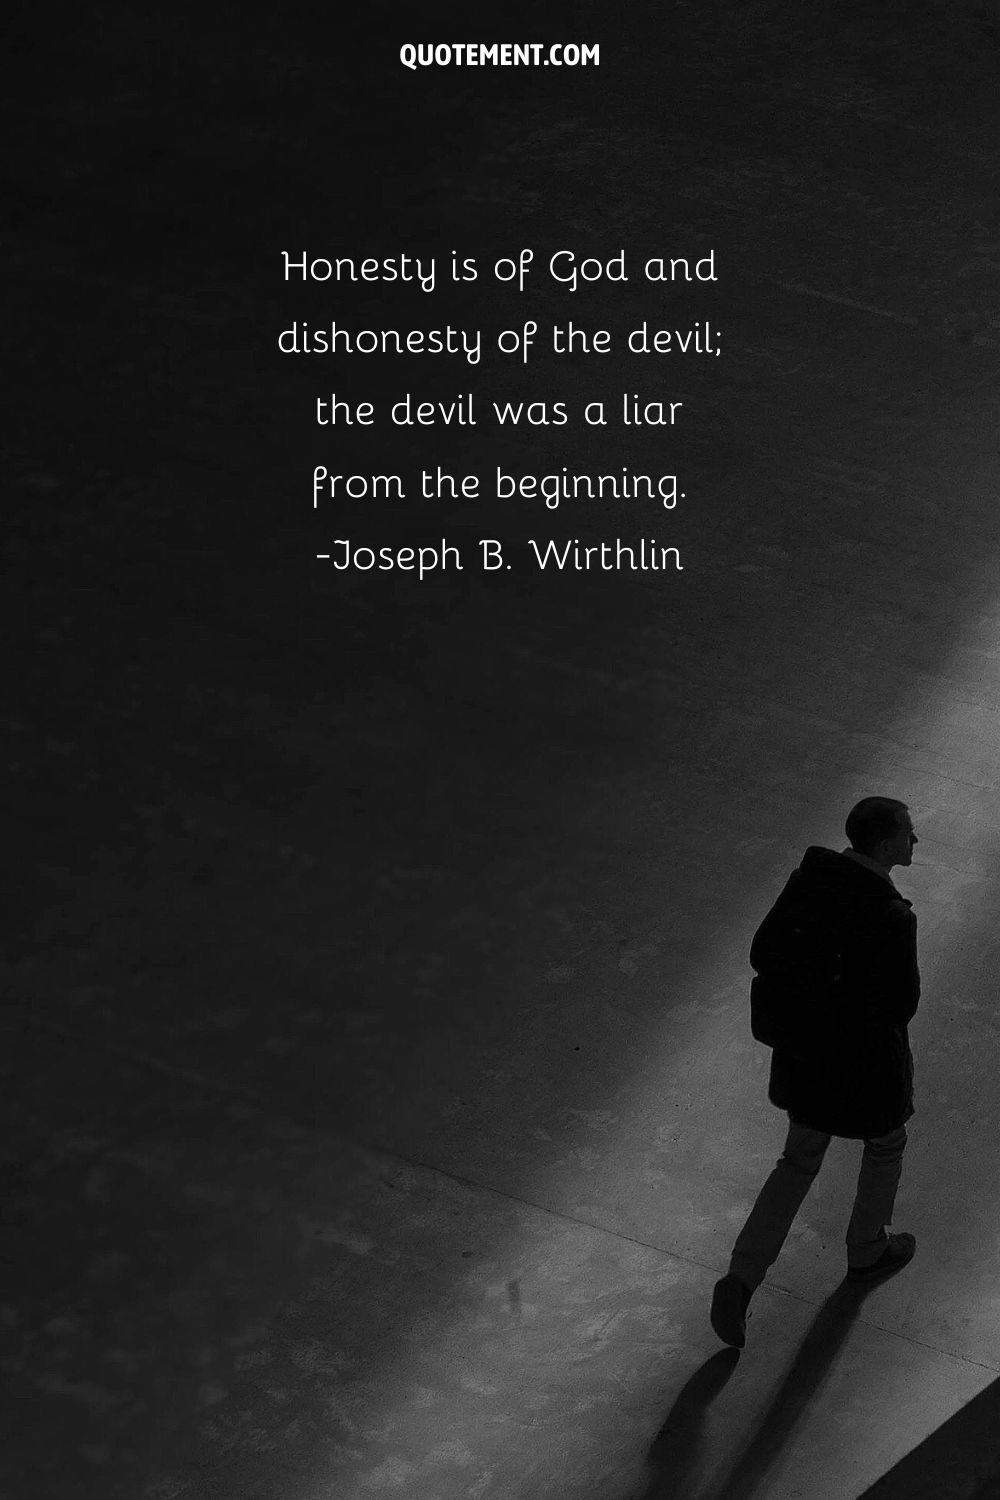 Honesty is of God and dishonesty of the devil; the devil was a liar from the beginning